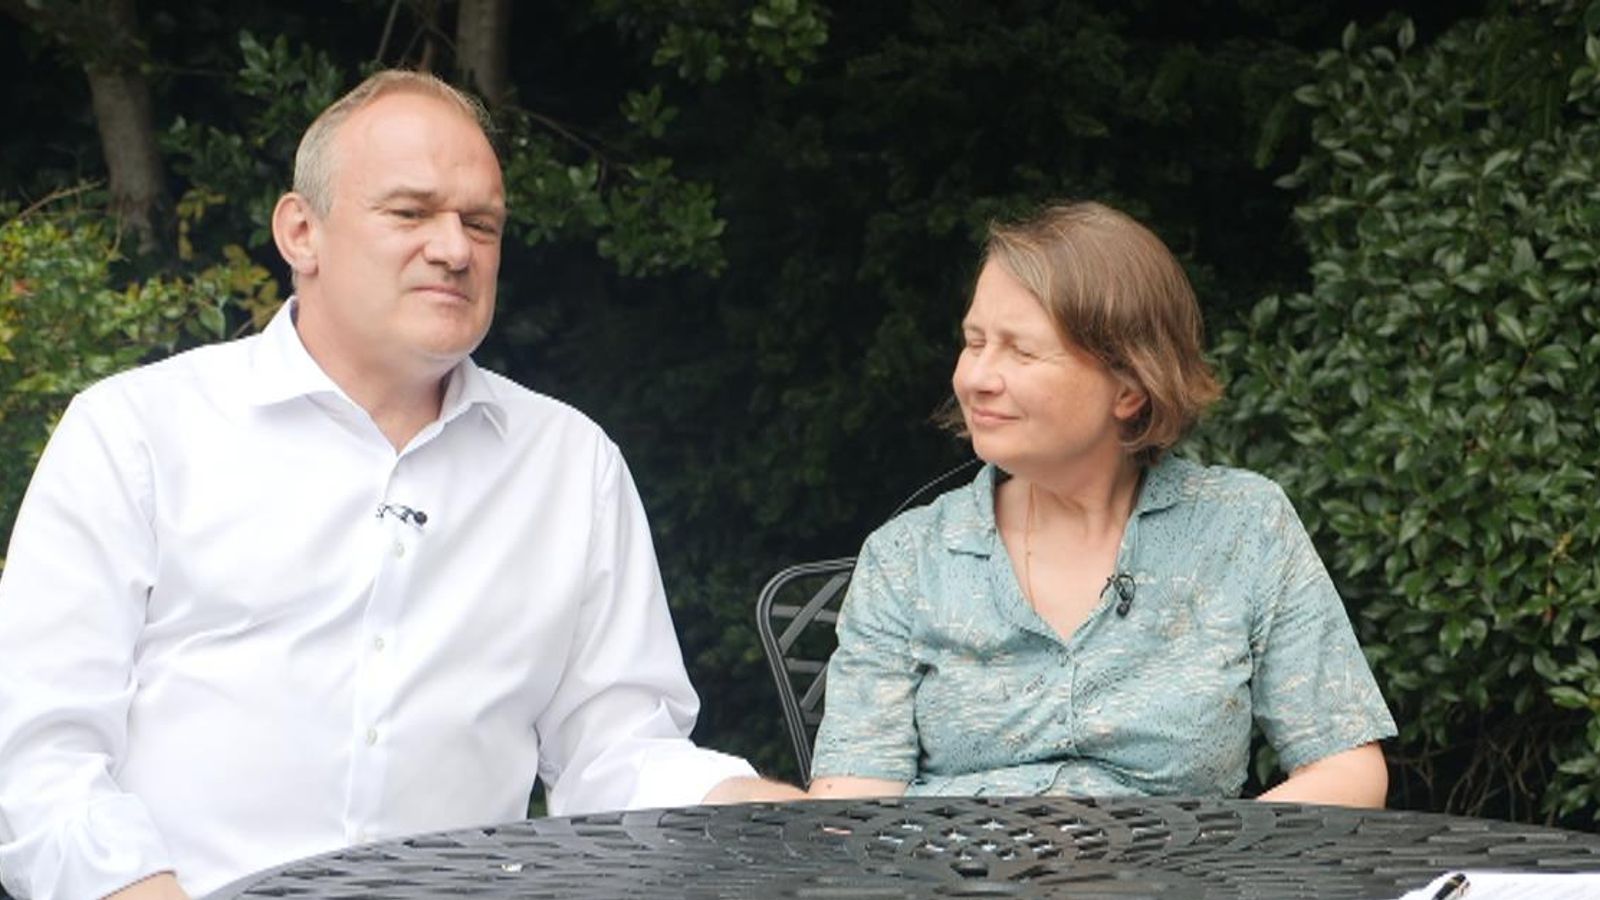 Sir Ed Davey: We felt we had a duty to talk about caring for our disabled son